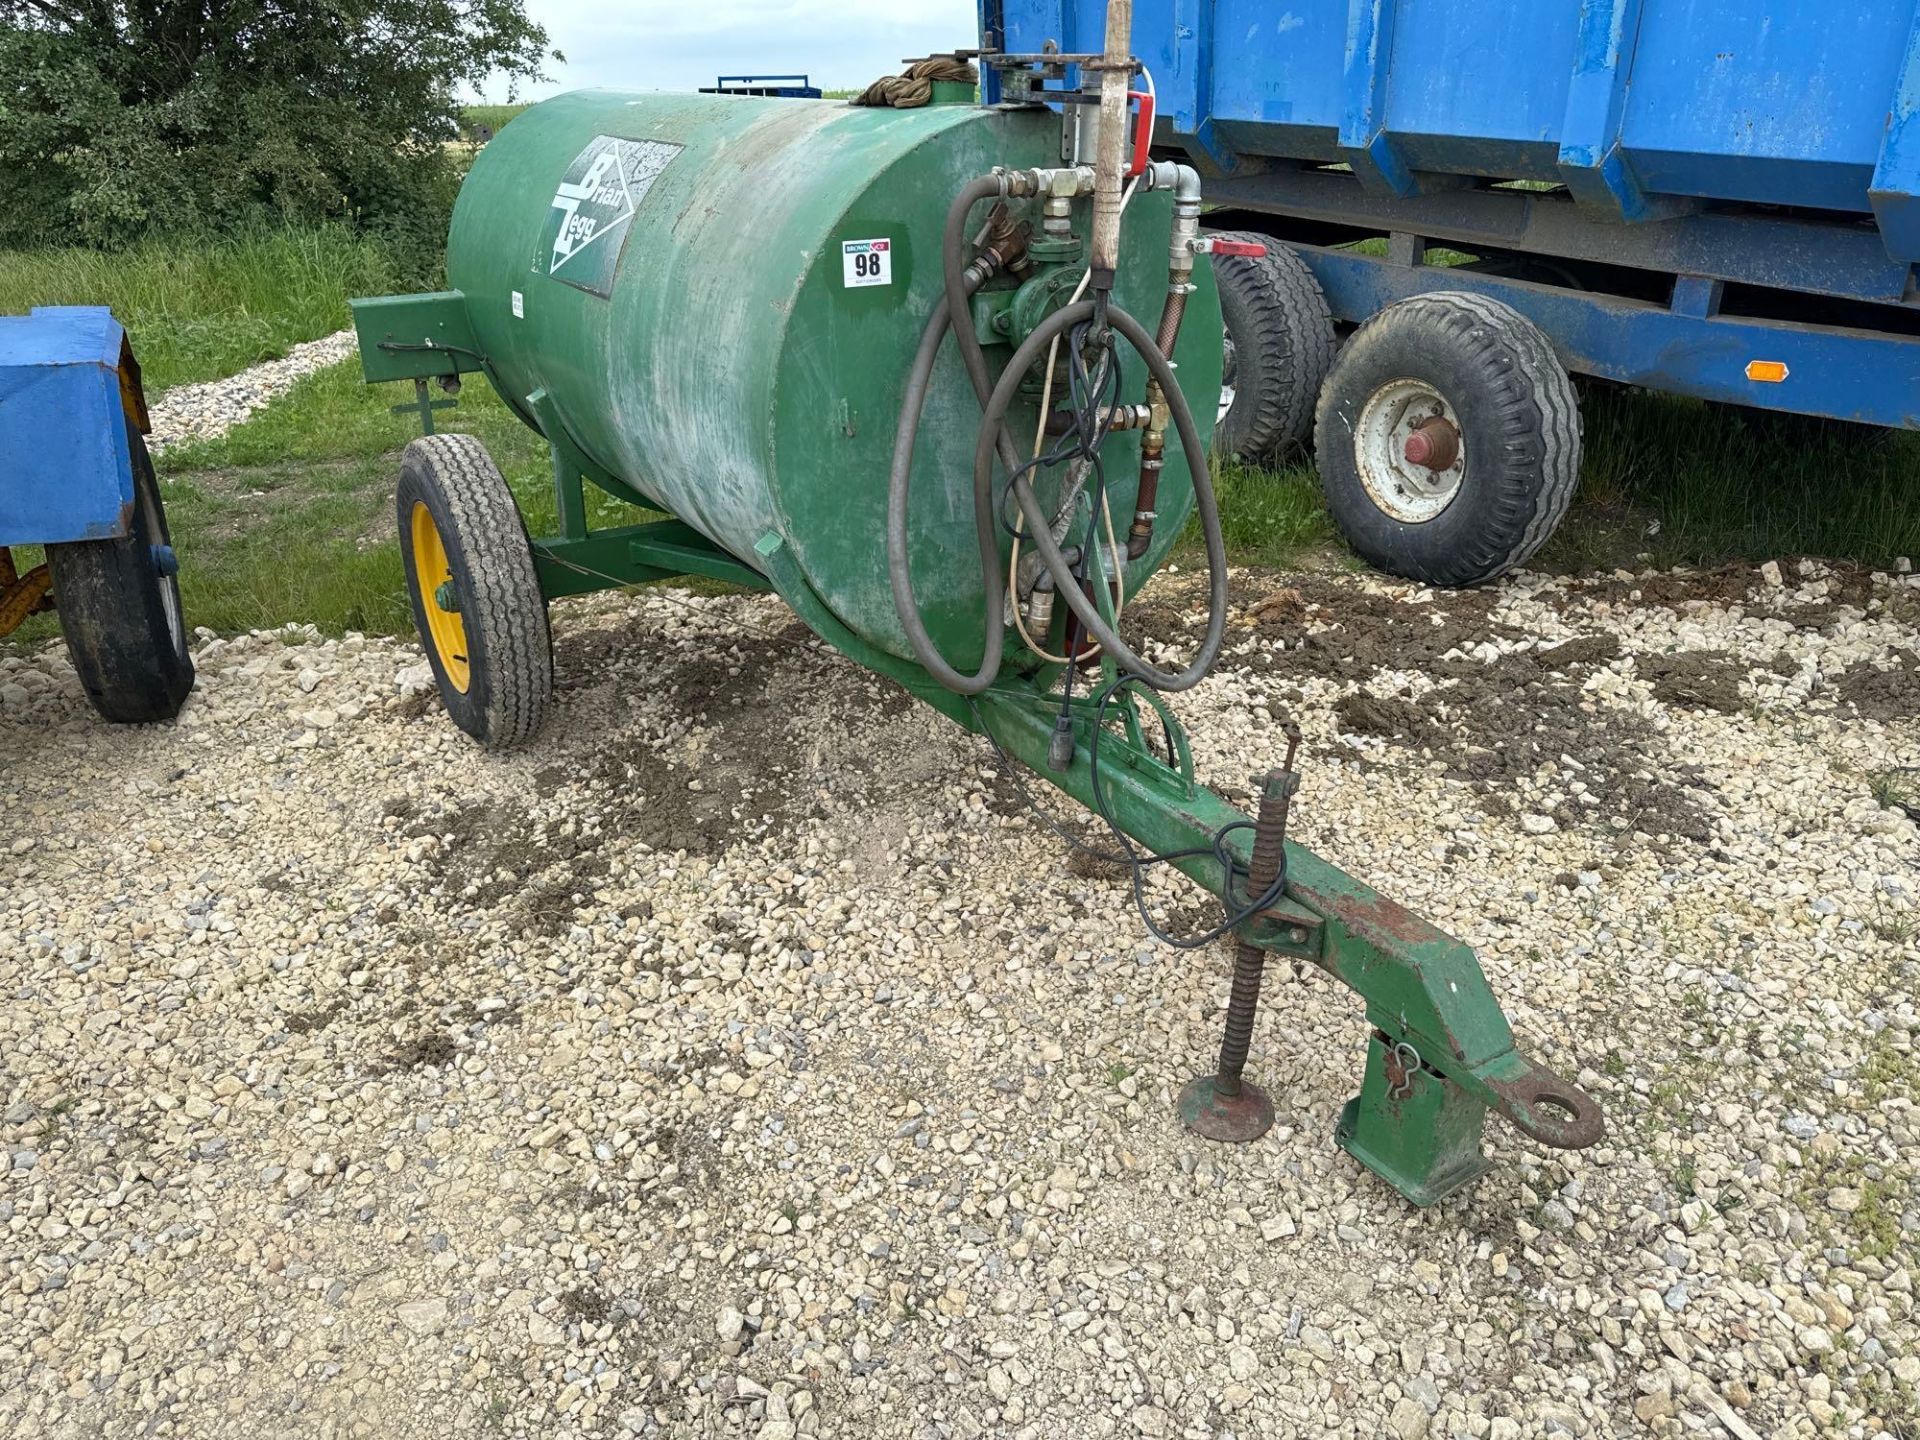 Brian Legg single axle fuel bowser with 12v pump on 6.00R16 wheels and tyres